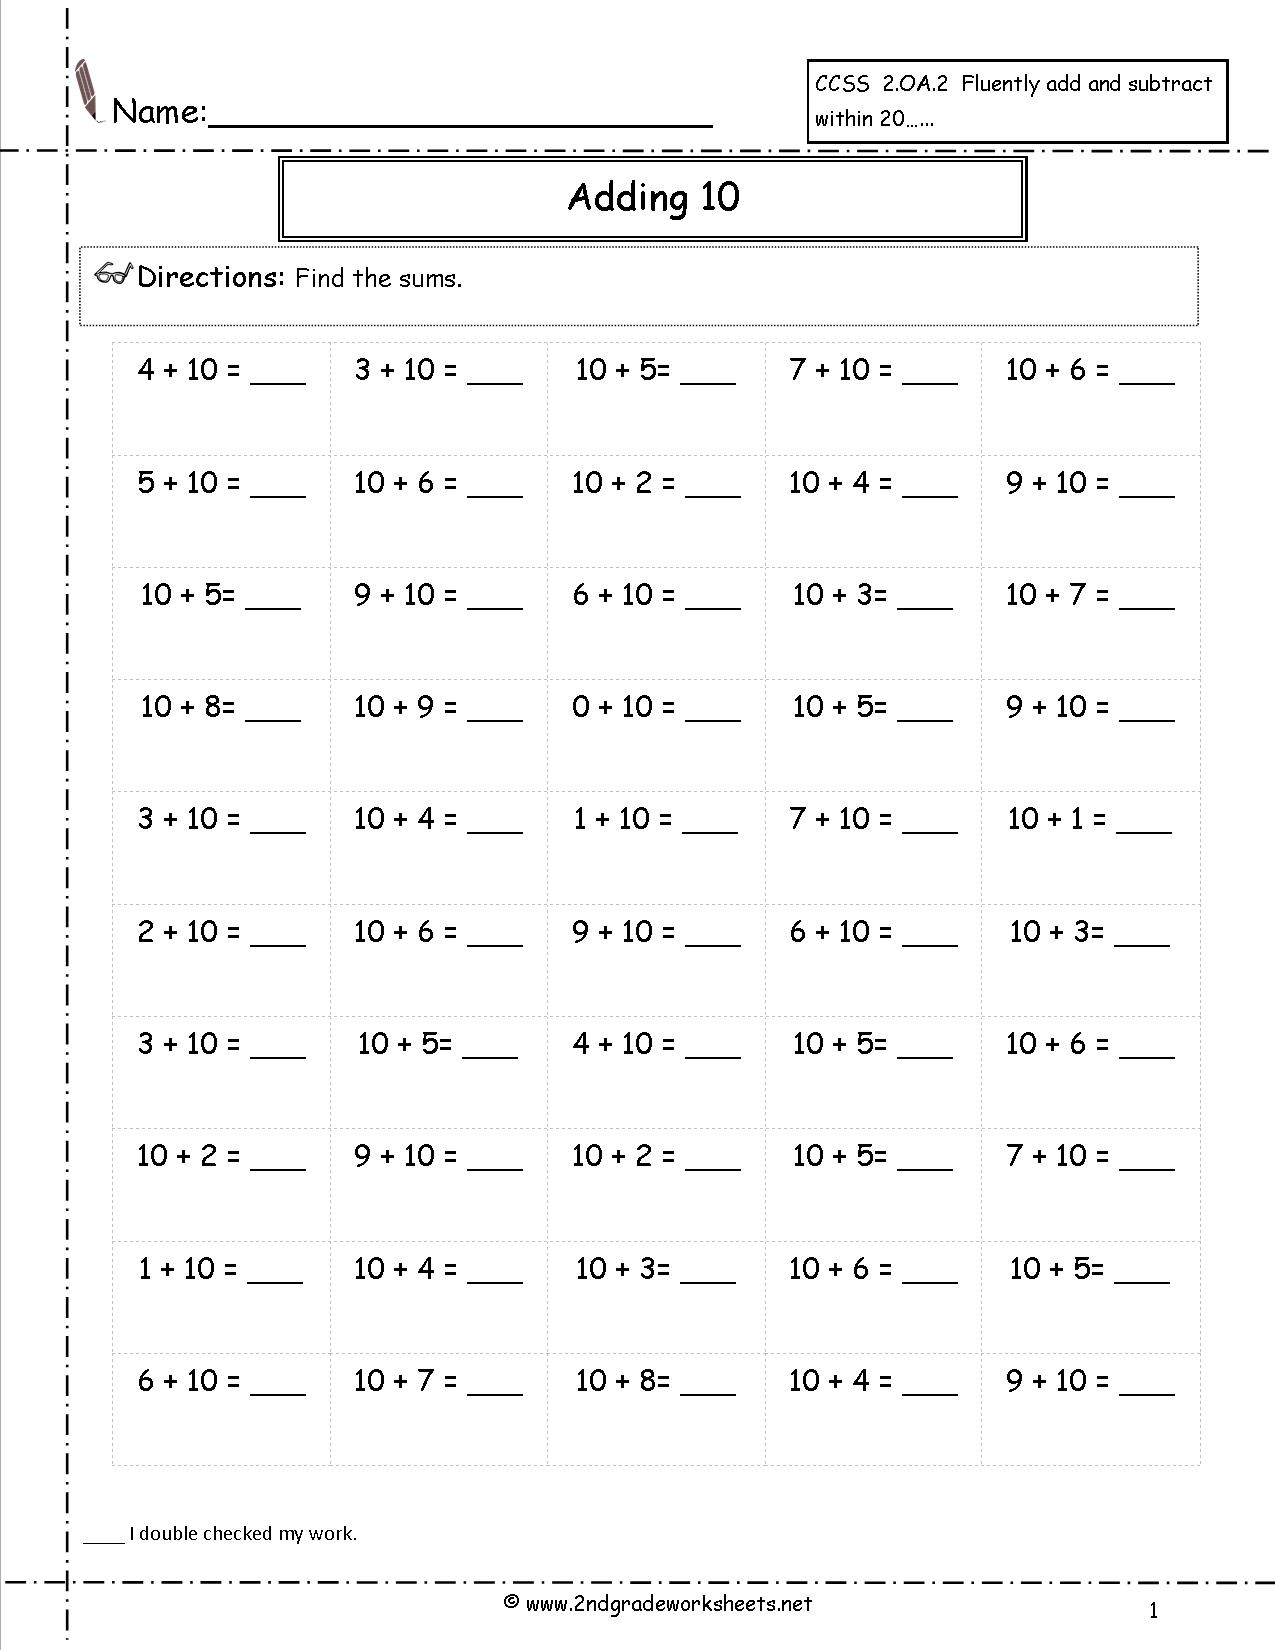 17-best-images-of-worksheets-adding-and-subtracting-10-adding-and-subtracting-10-worksheets